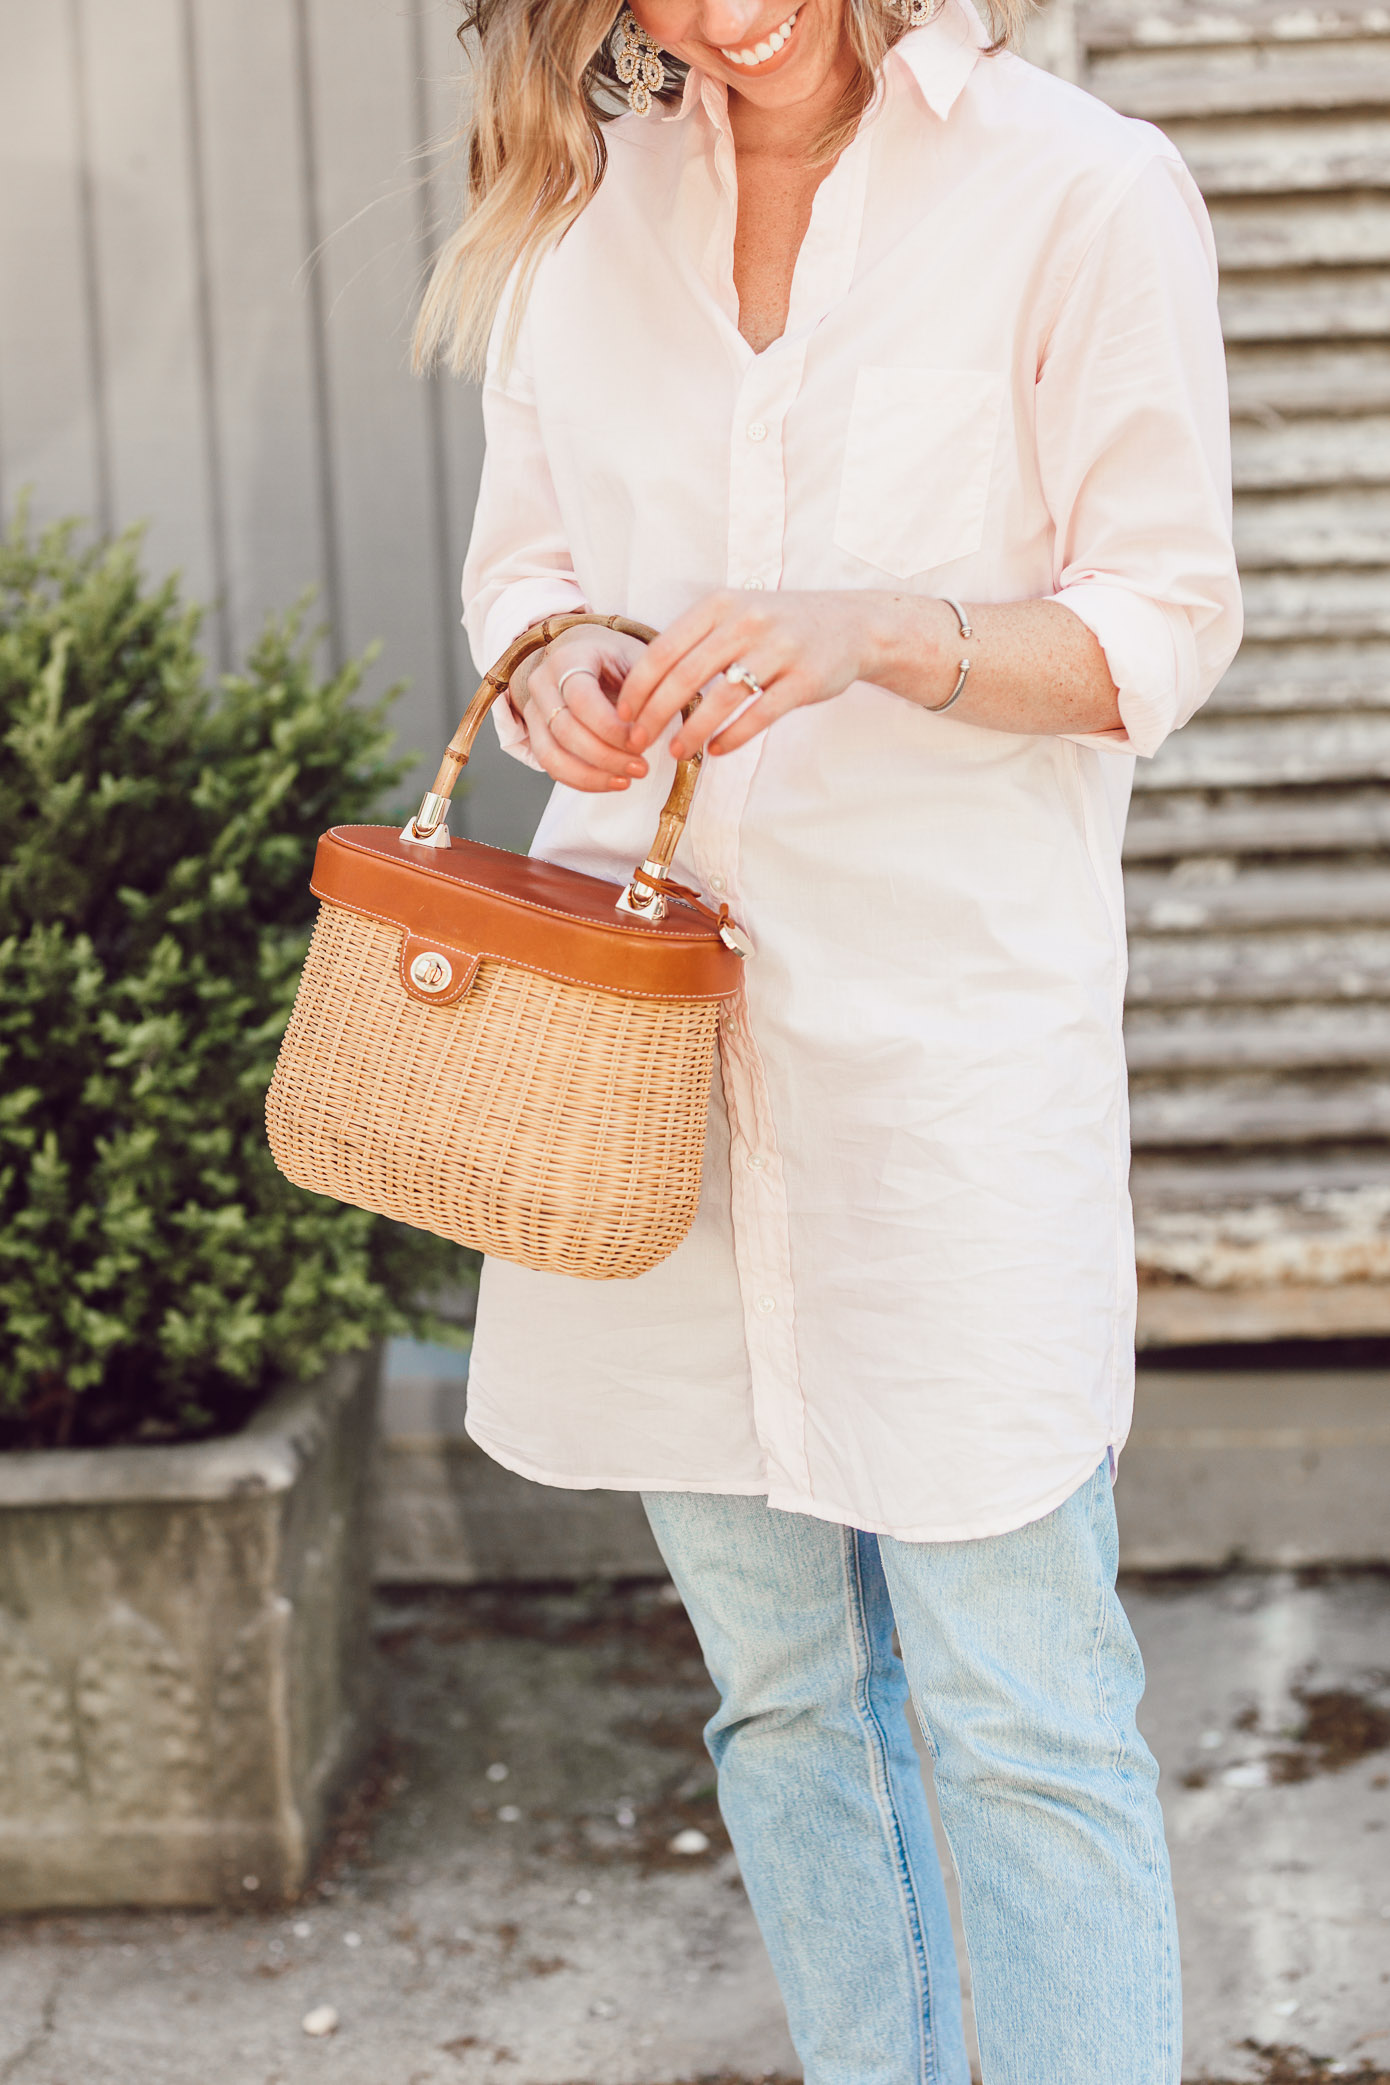 Laura Leigh of Louella Reese shows how to style an oversized button down shirt for spring | ft. Frank & Eileen, Everlane, Jack Rogers, and J.McLaughlin | Louella Reese